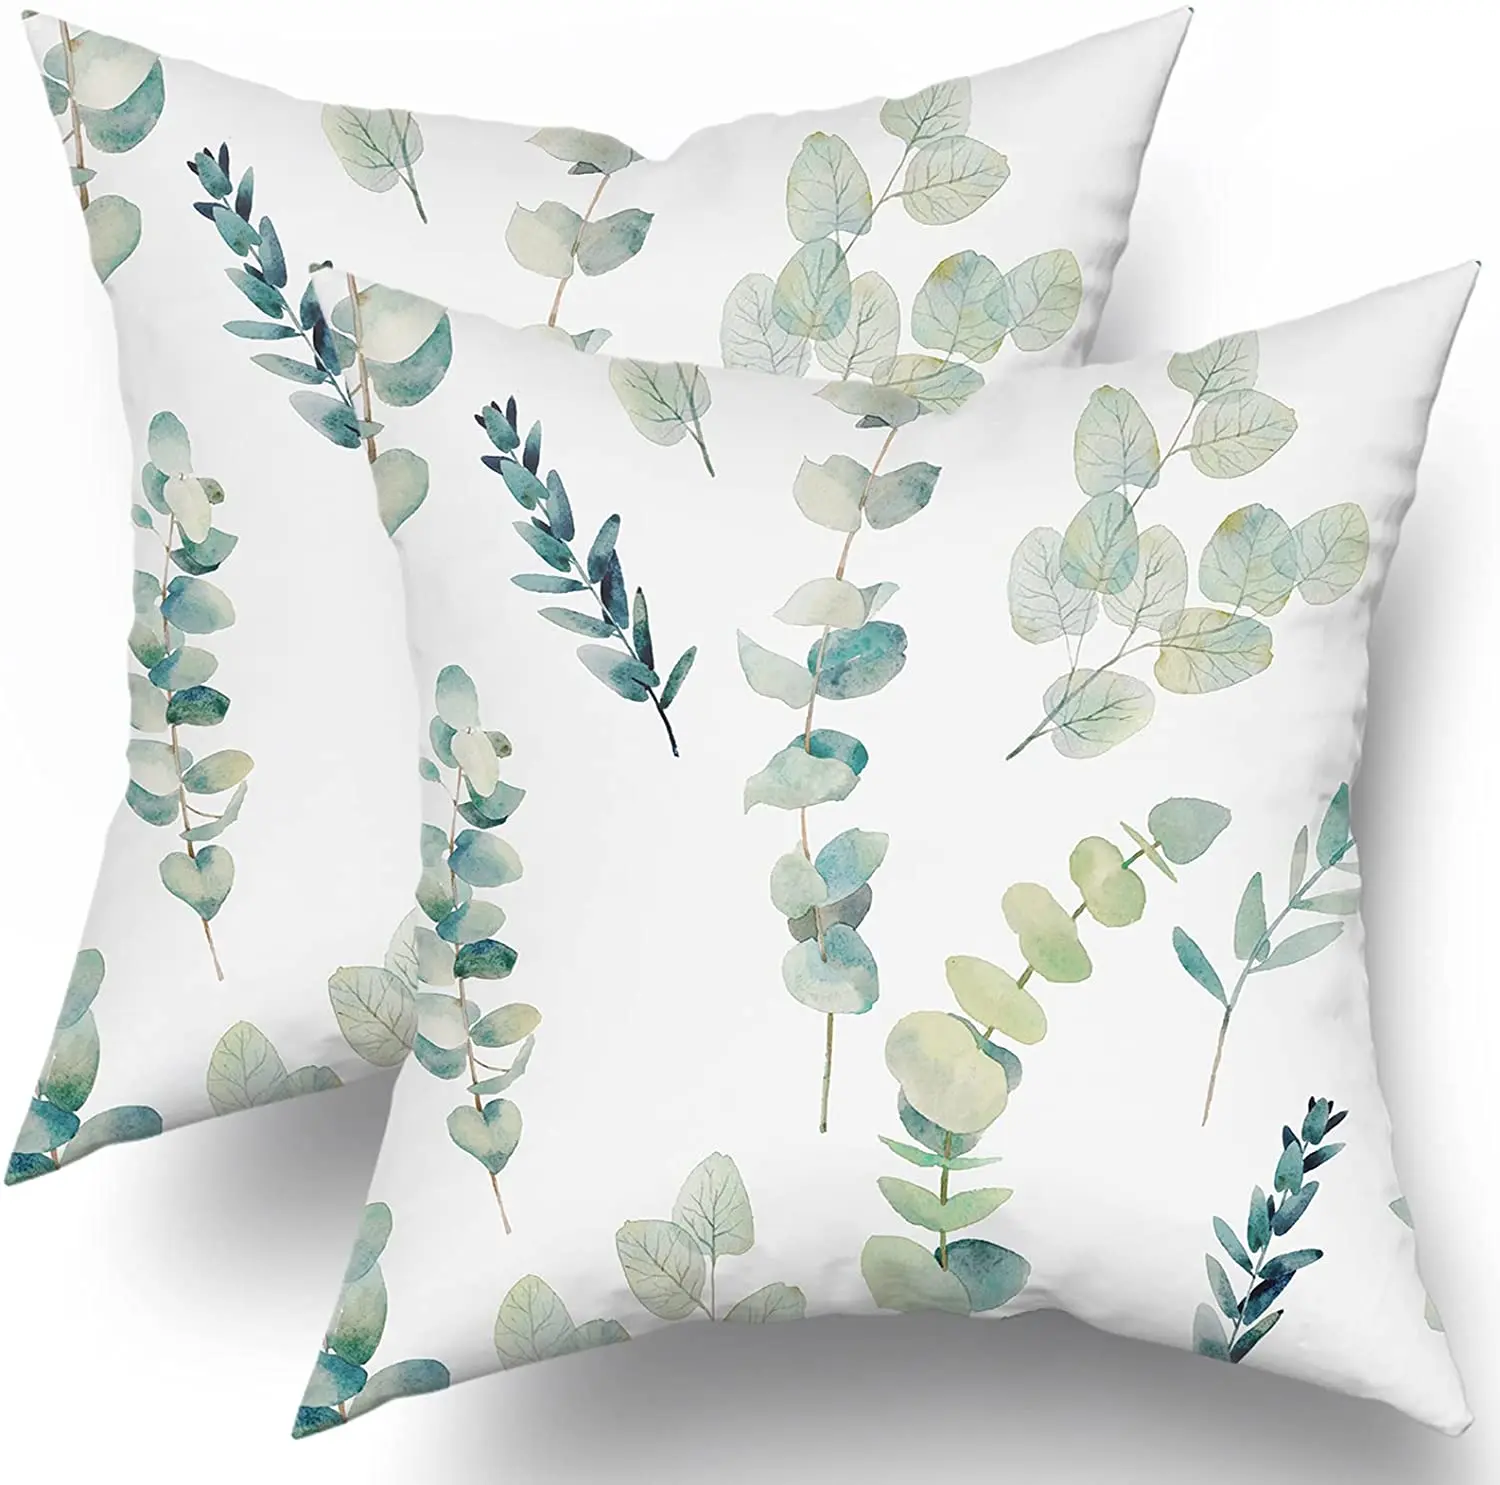 

Sage Green Pillow Covers 18X18 Inch Eucalyptus Branches Floral Watercolor Decorative Green Leaf Print Pillow Case for Home Sofa